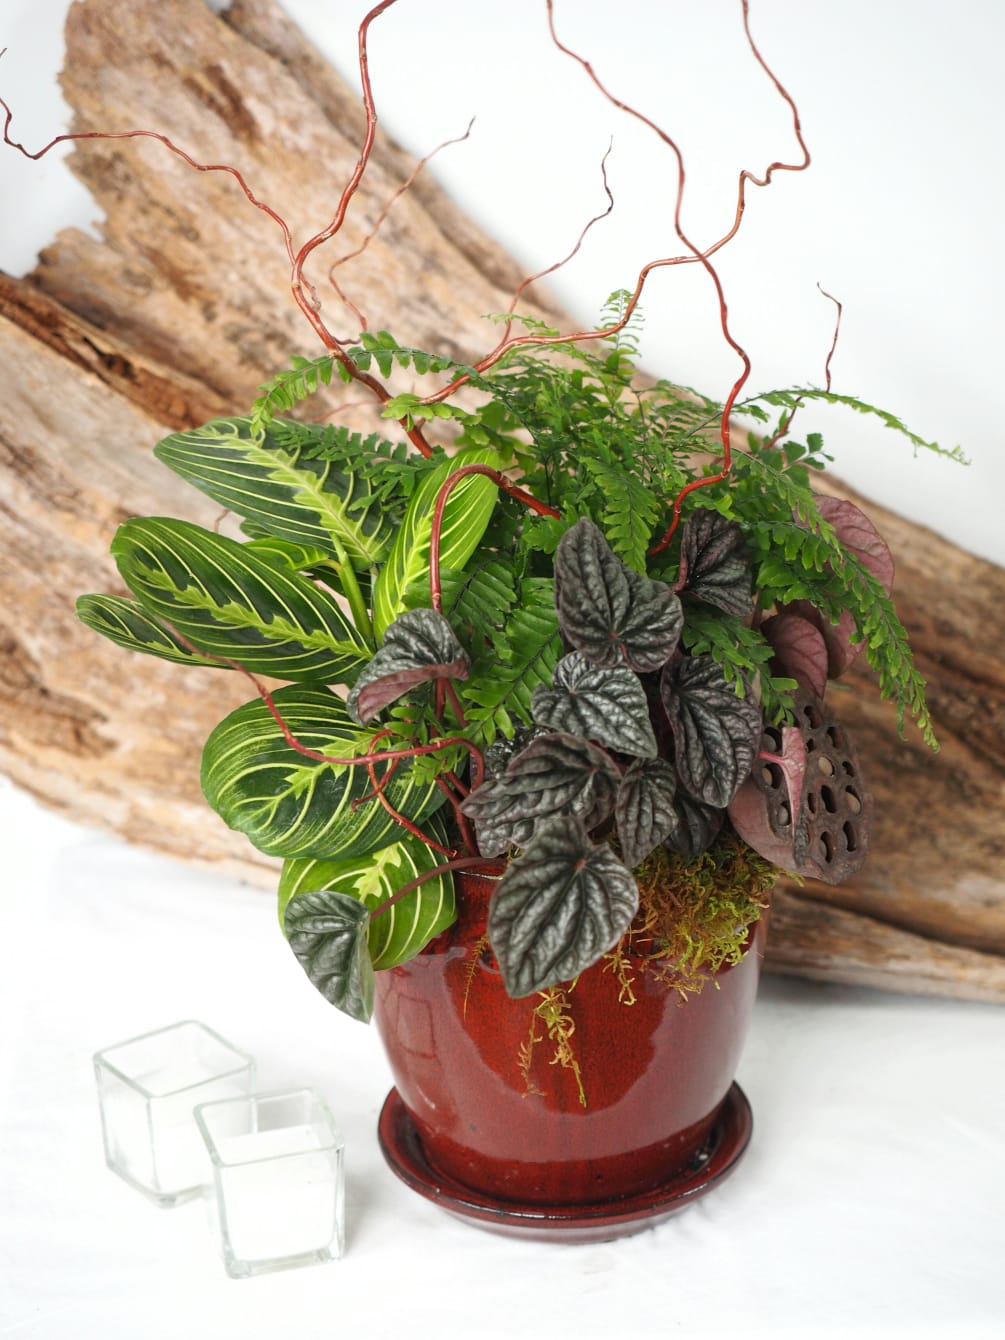 A trio of low to medium light tropical plants with decorative finishes